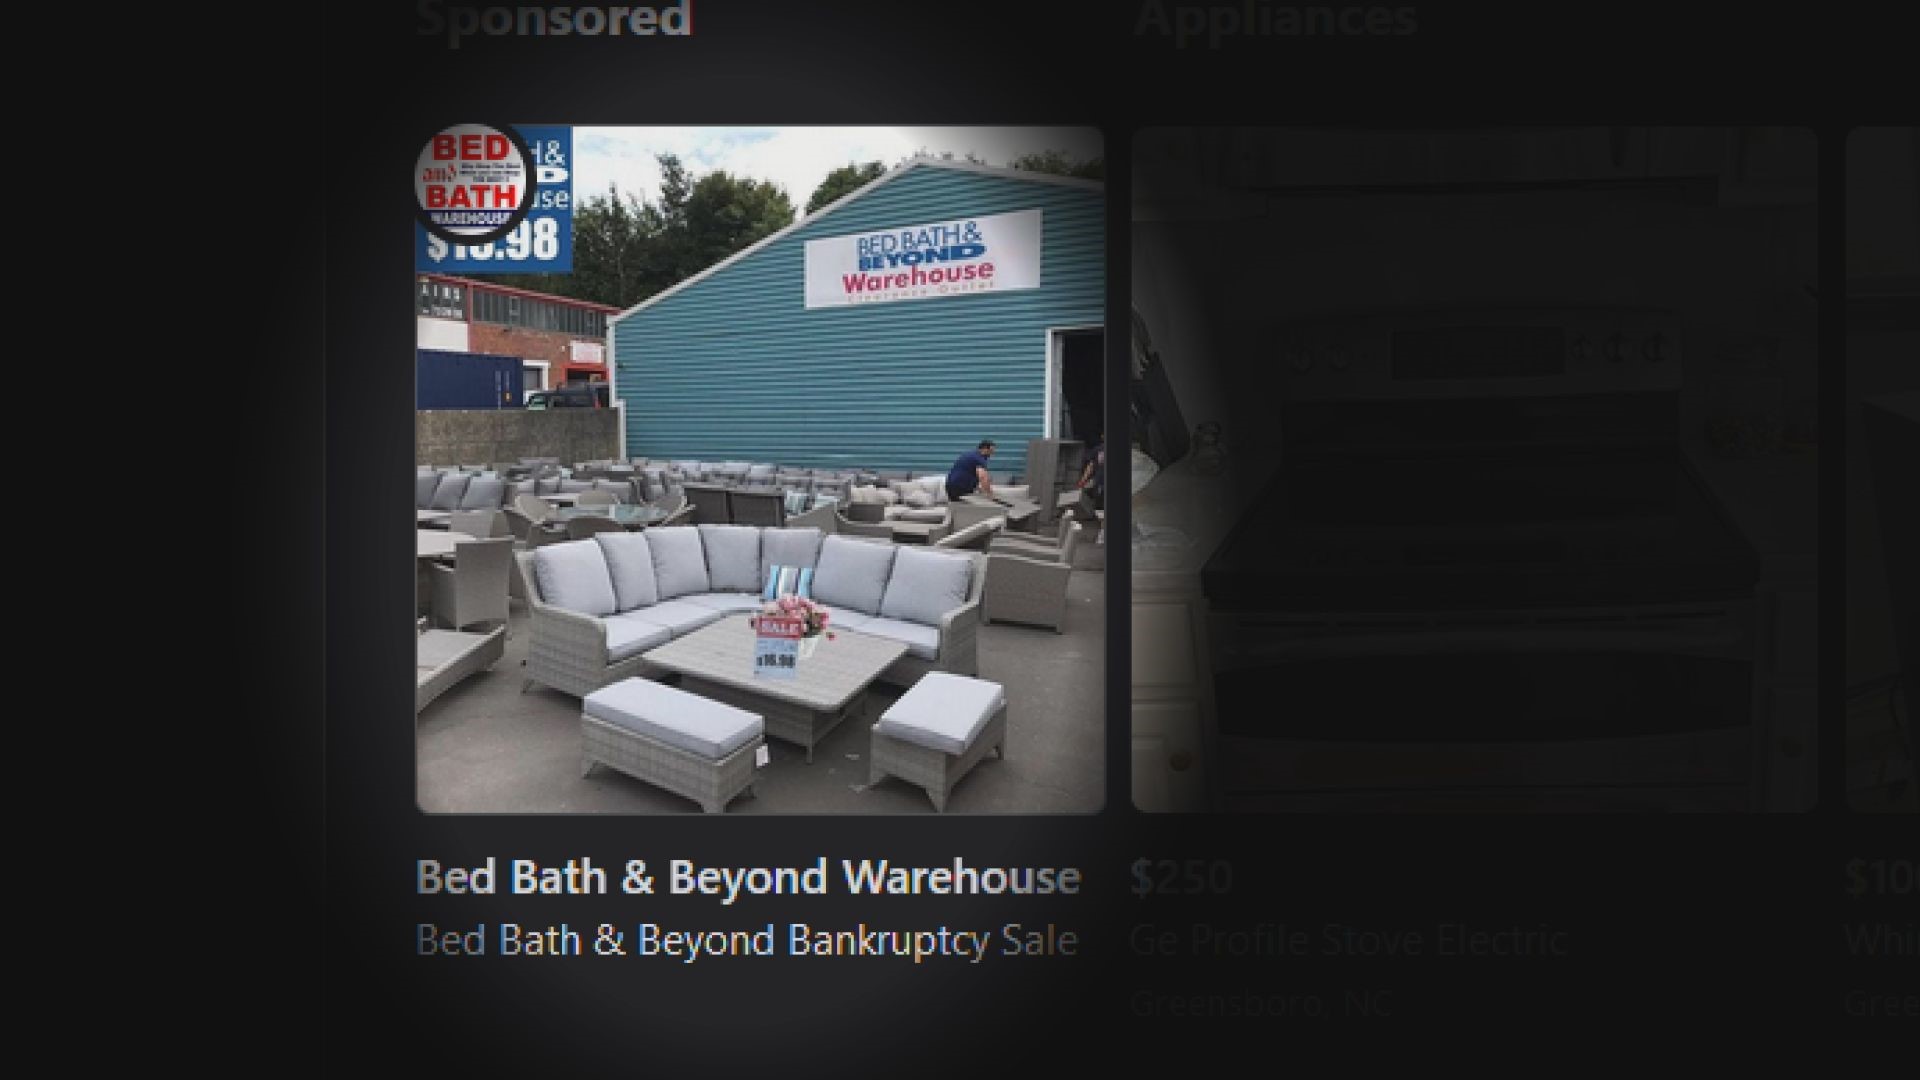 There are at least 18 sites pretending to be Bed, Bath & Beyond deals online according to TrendMicro.com